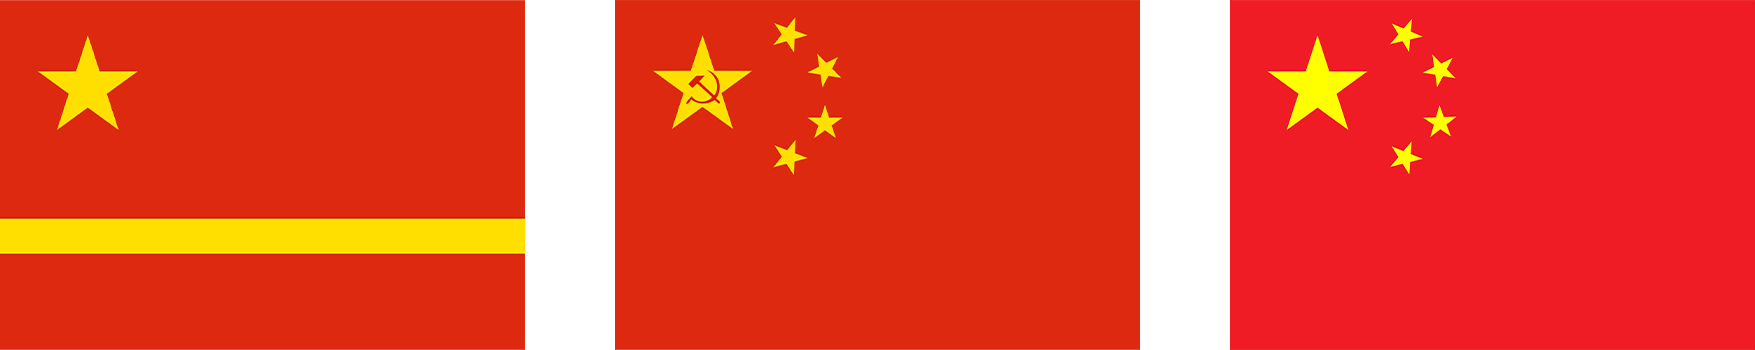 How was the flag of the People's Republic of China created? History of the flag of China.